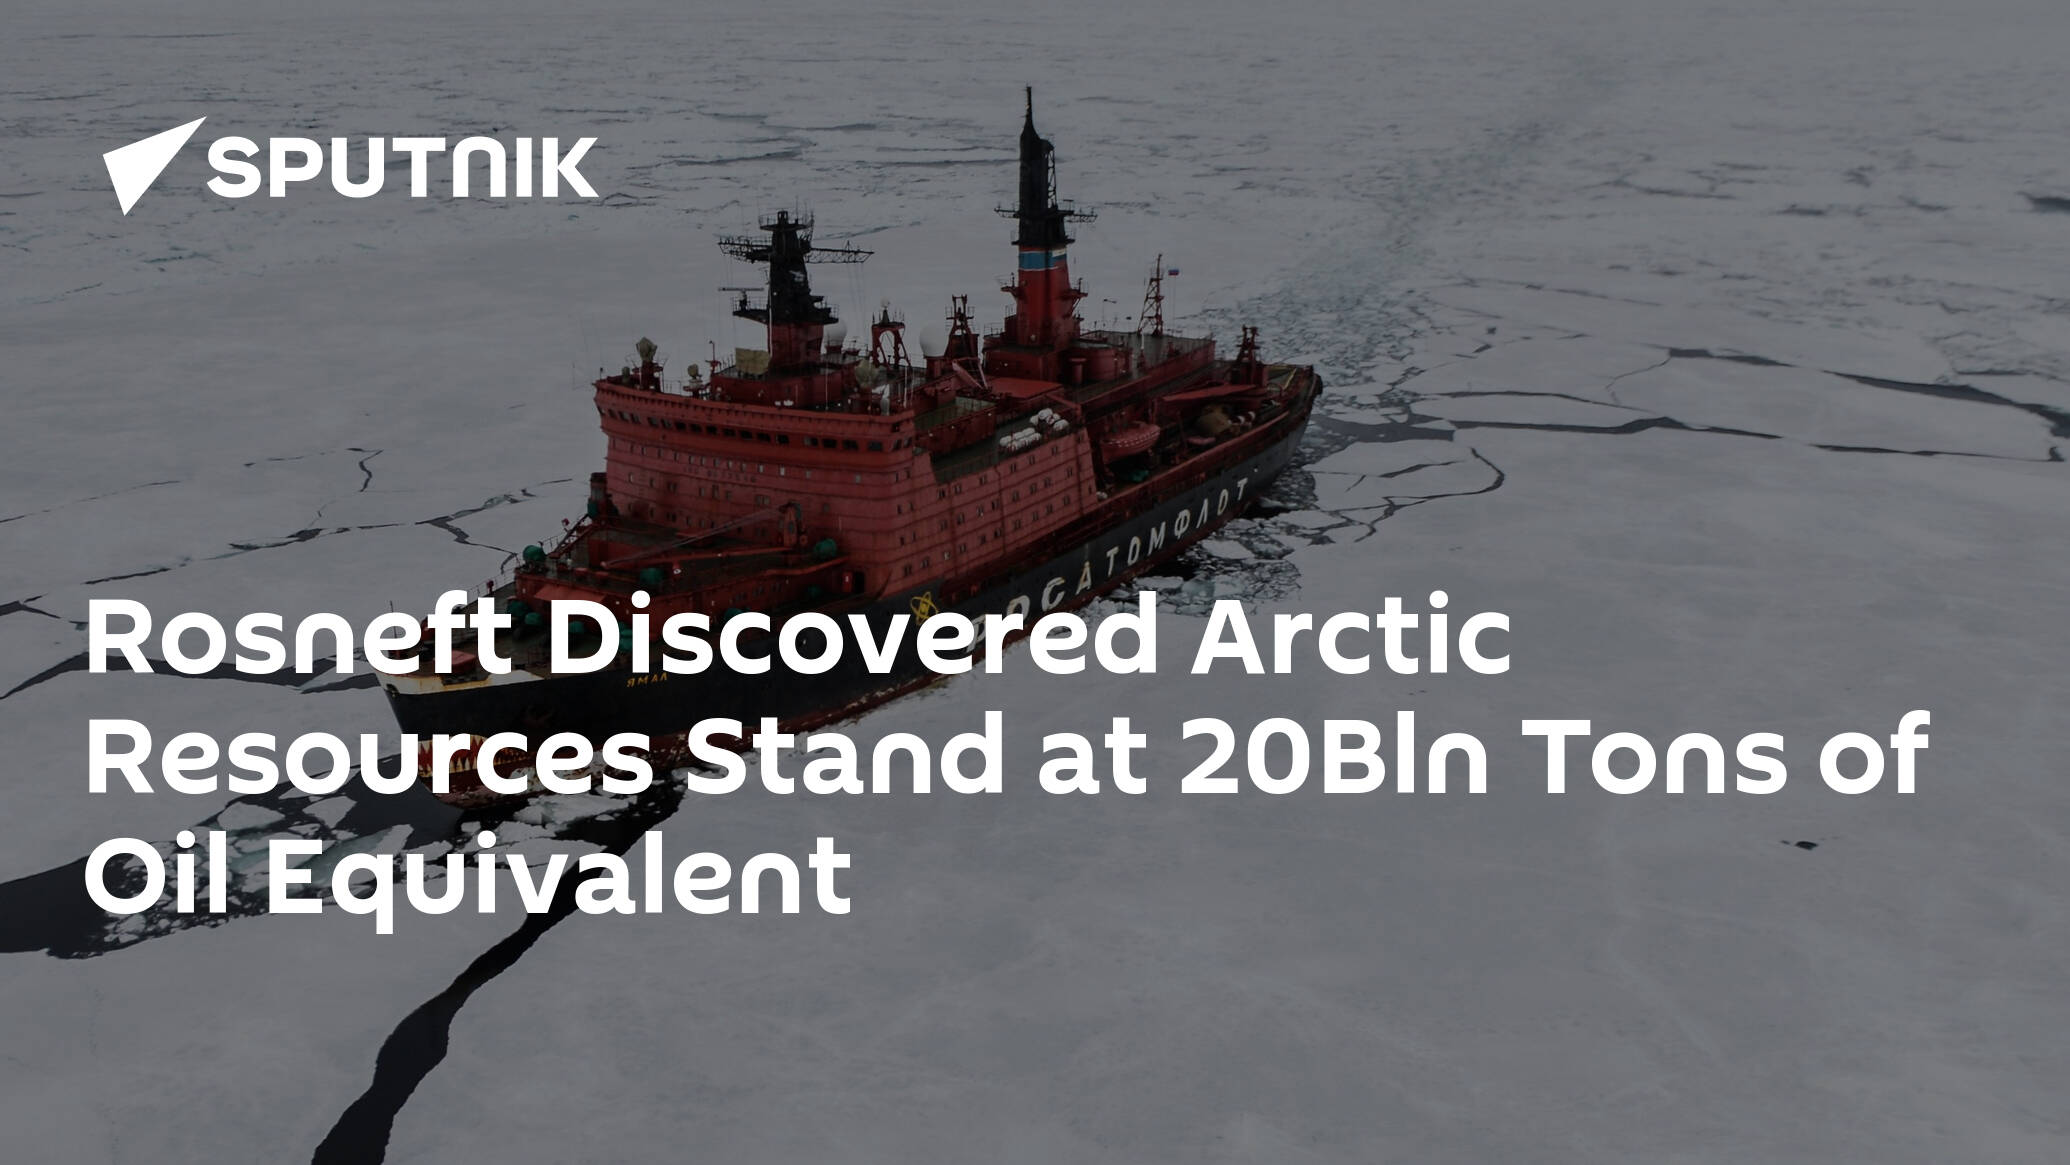 Rosneft's Discovered Arctic Resources Stand at 20Bln Tonnes of Oil Equivalent